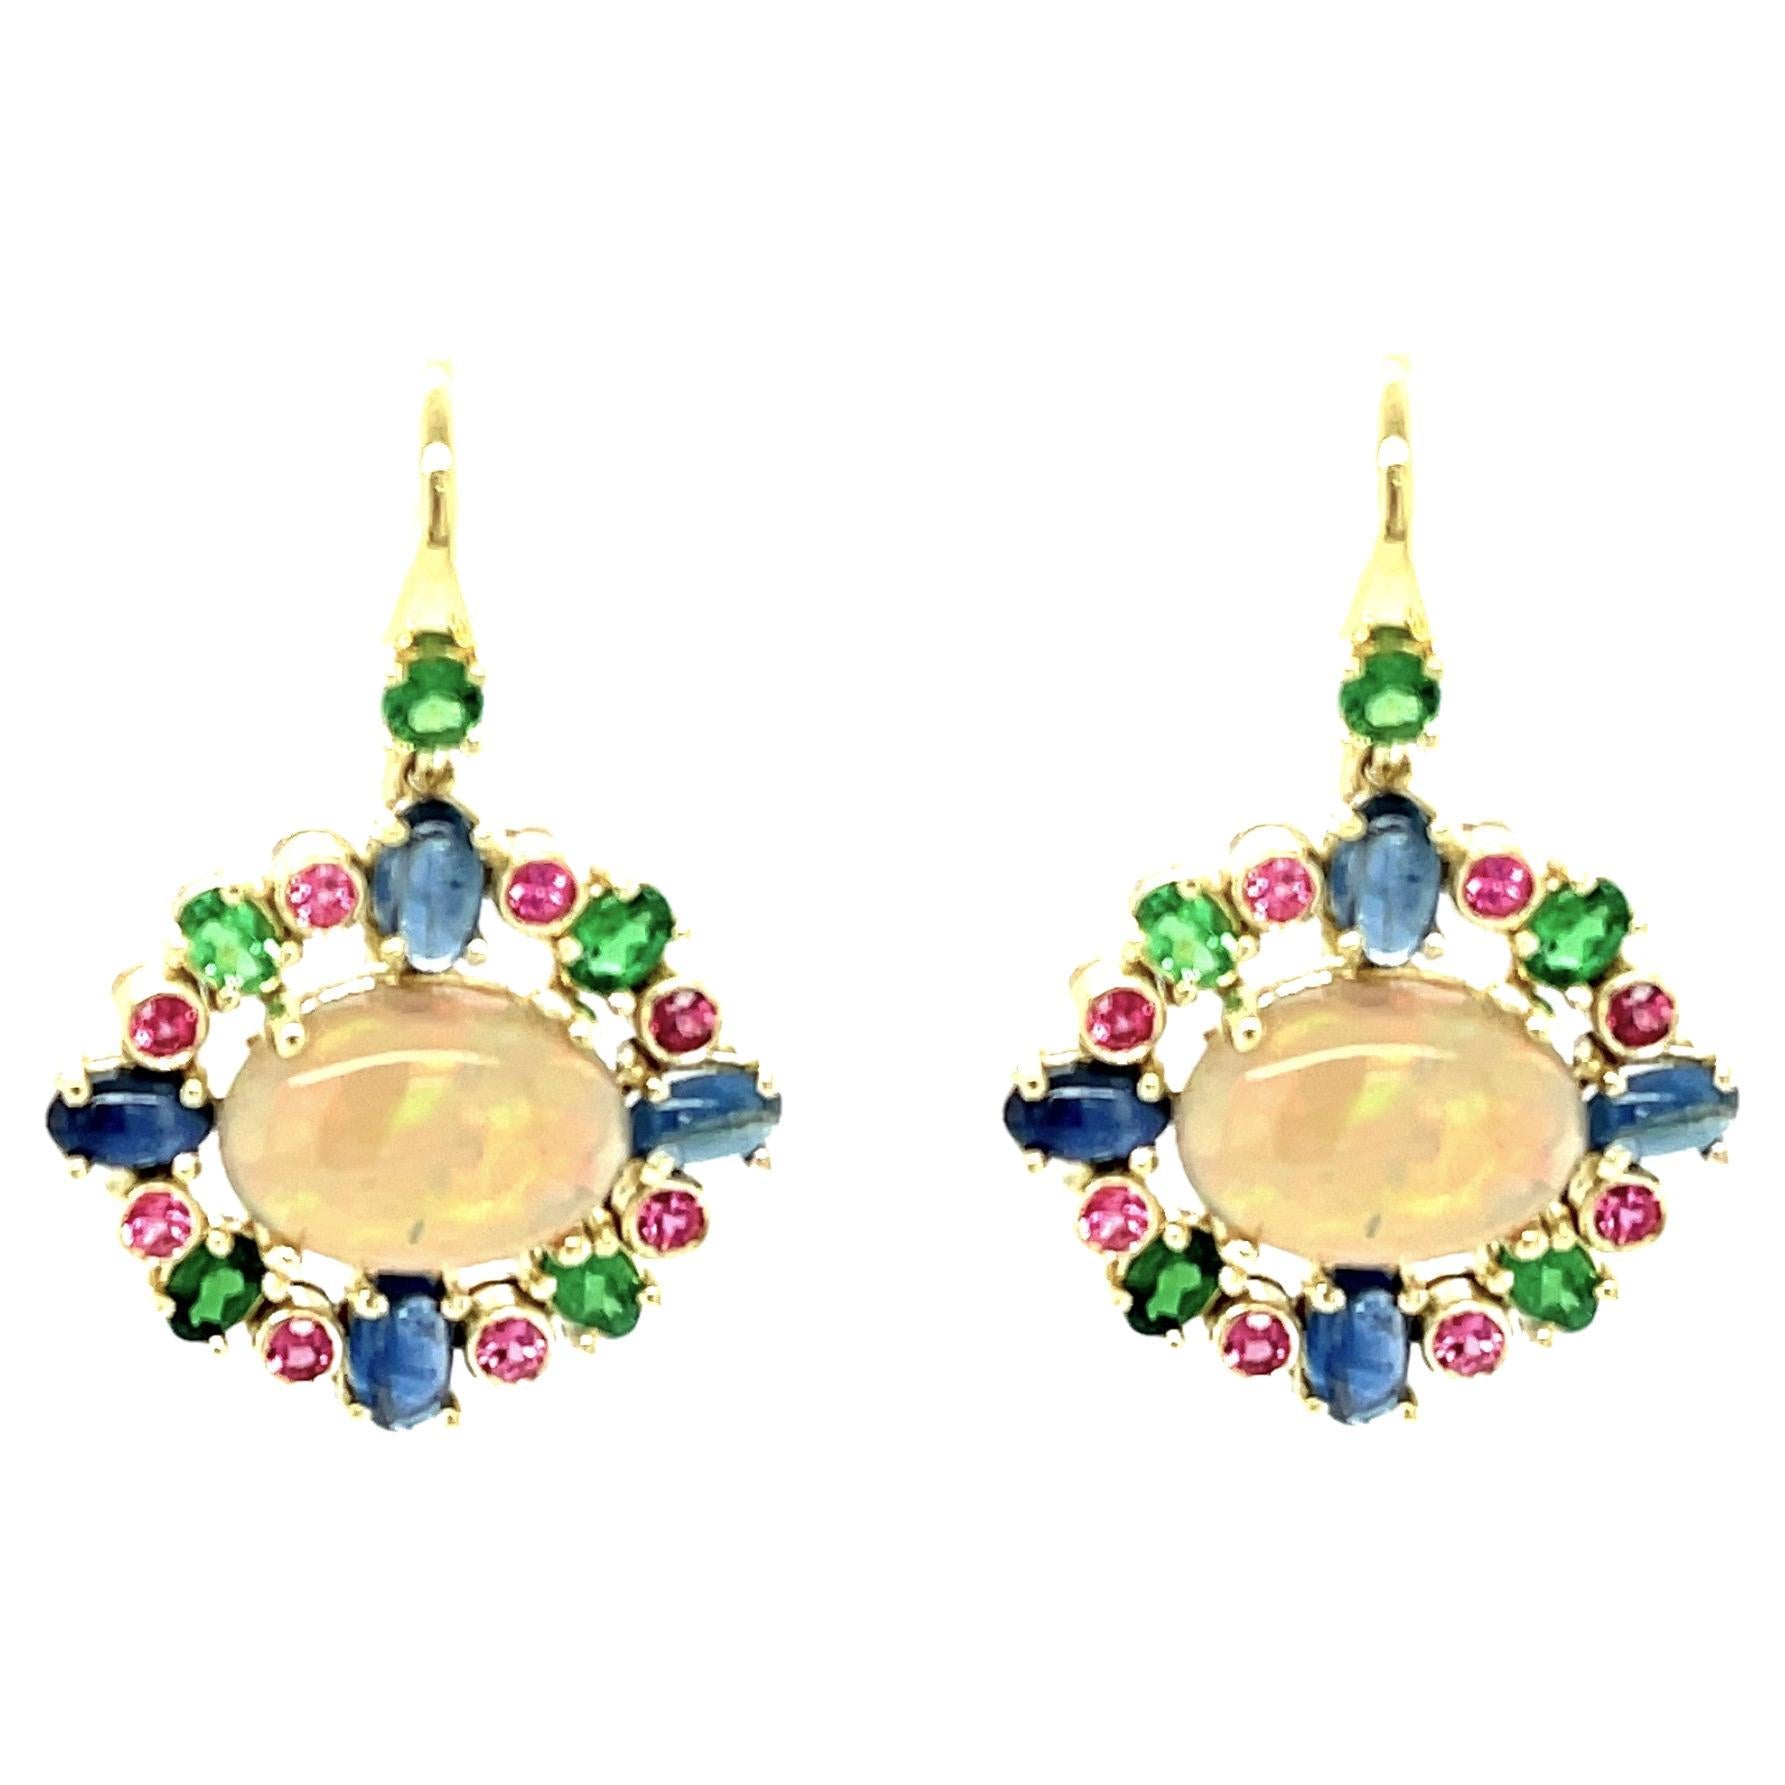 18k yellow gold
These gorgeous dangle earrings feature a rainbow of colorful gemstones including Australian opals, African garnets, pink spinel and blue sapphires! The opals have beautiful play-of-color, exhibiting greens, lavenders, orange, yellow,